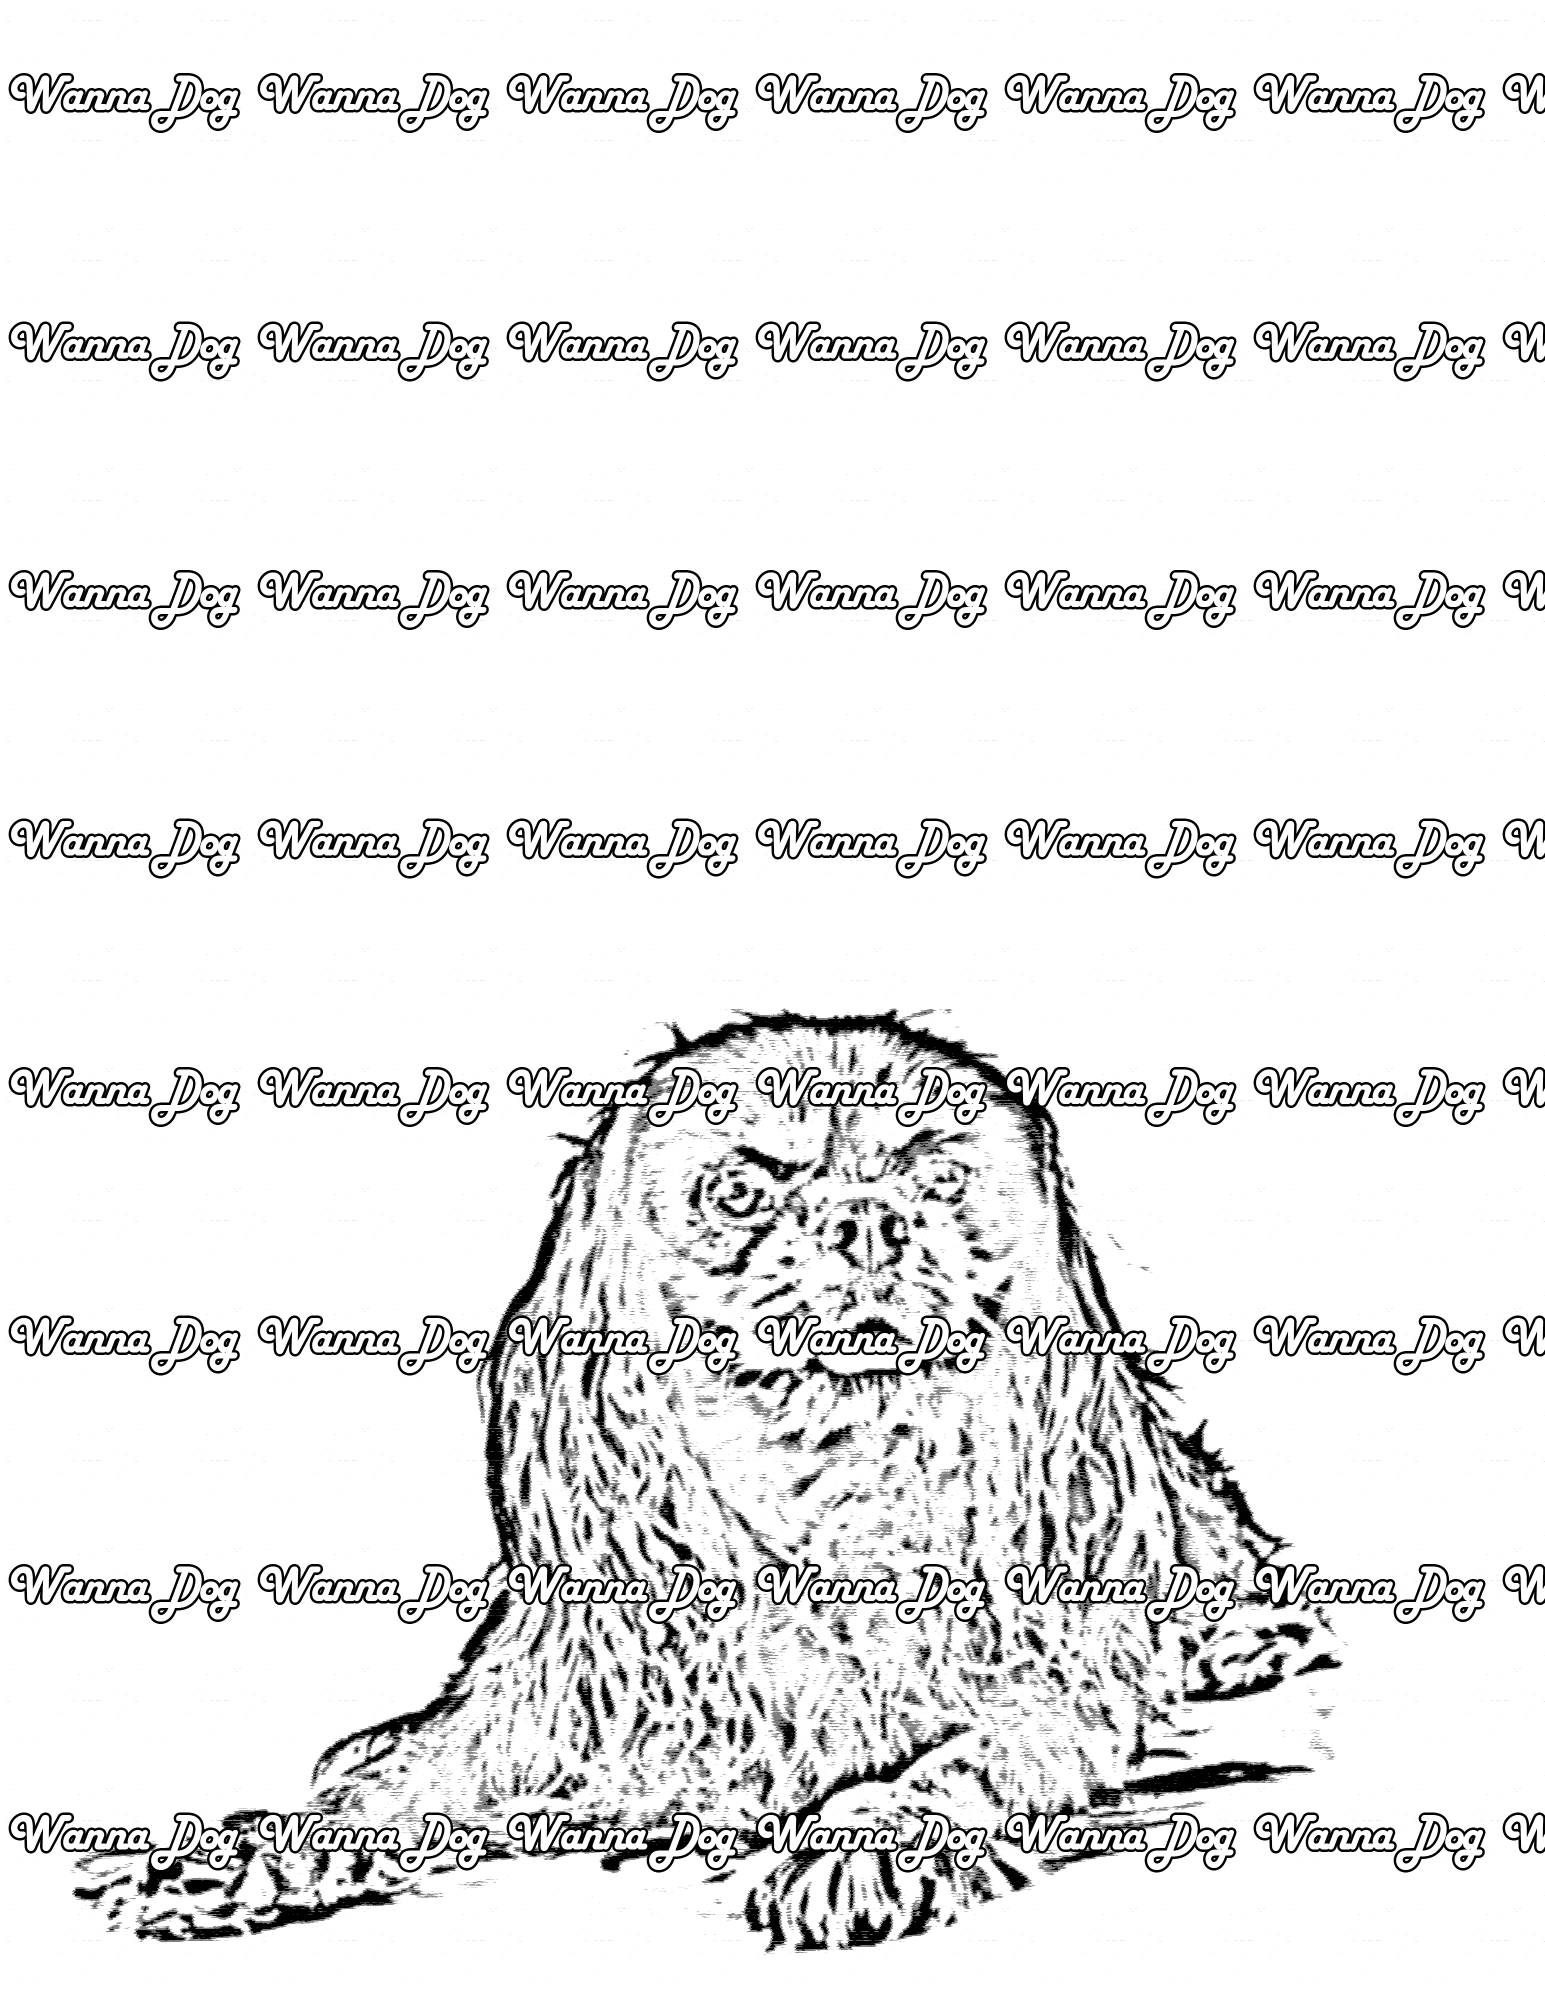 Cavalier King Charles Spaniel Coloring Page of a Cavalier King Charles Spaniel sitting for the camera